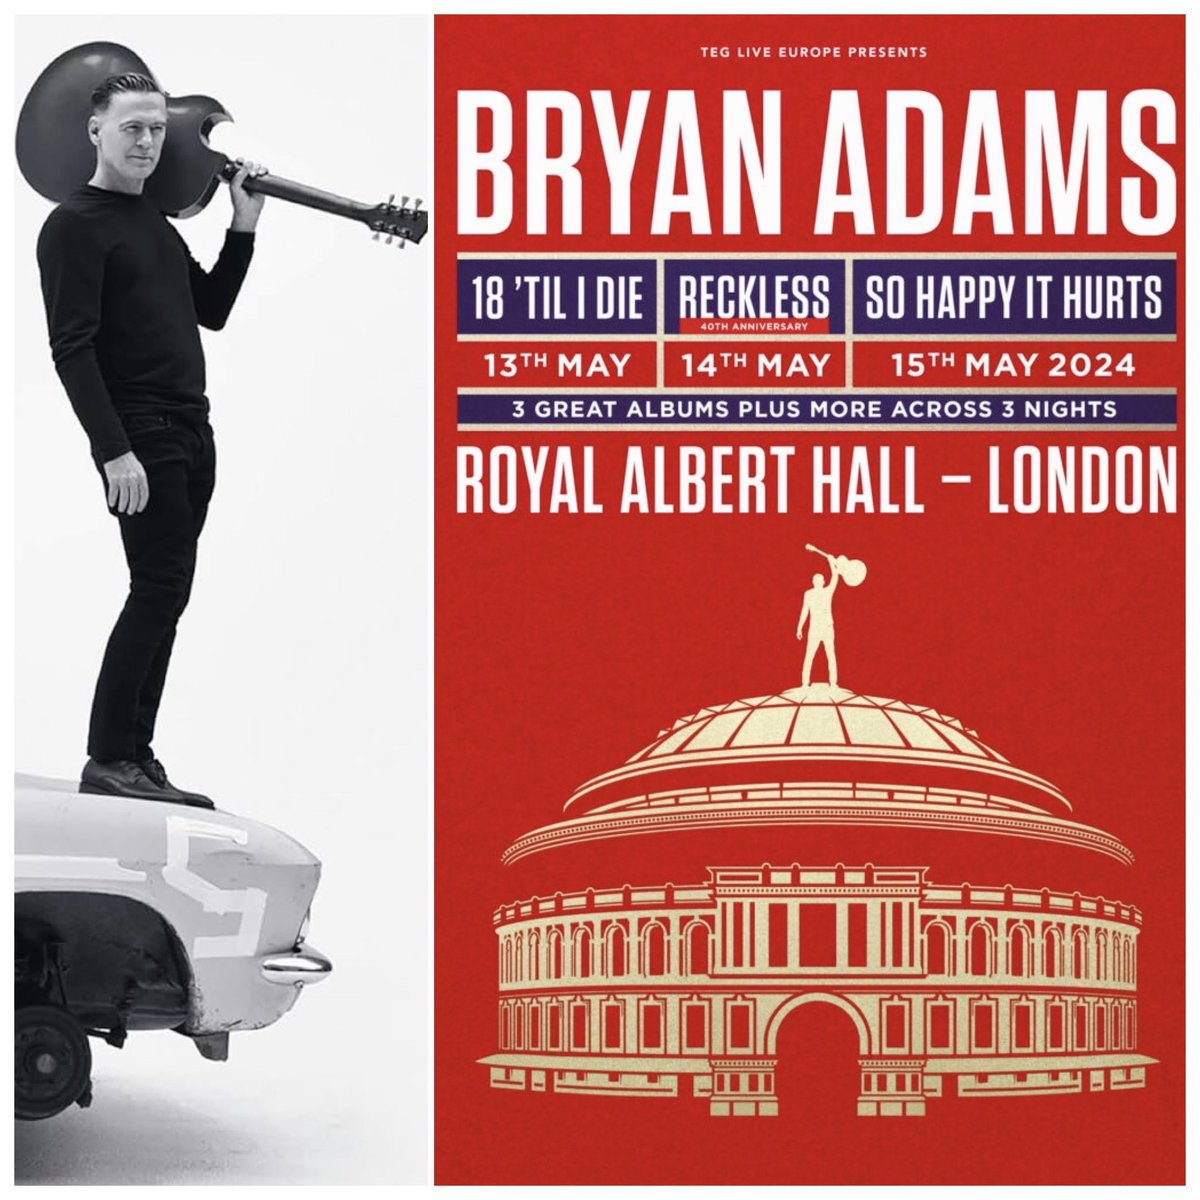 BRYAN ADAMS MAY 15th 2024 at Royal Albert Hall London, England Tour: So Happy It Hurts Tour SET LIST: So Happy It Hurts (full album show) 1. Kick Ass 2. On the Road 3. I've Been Looking for You 4. Always Have, Always Will 5. Just Like Me, Just Like You 6. Never Gonna Rain 7.